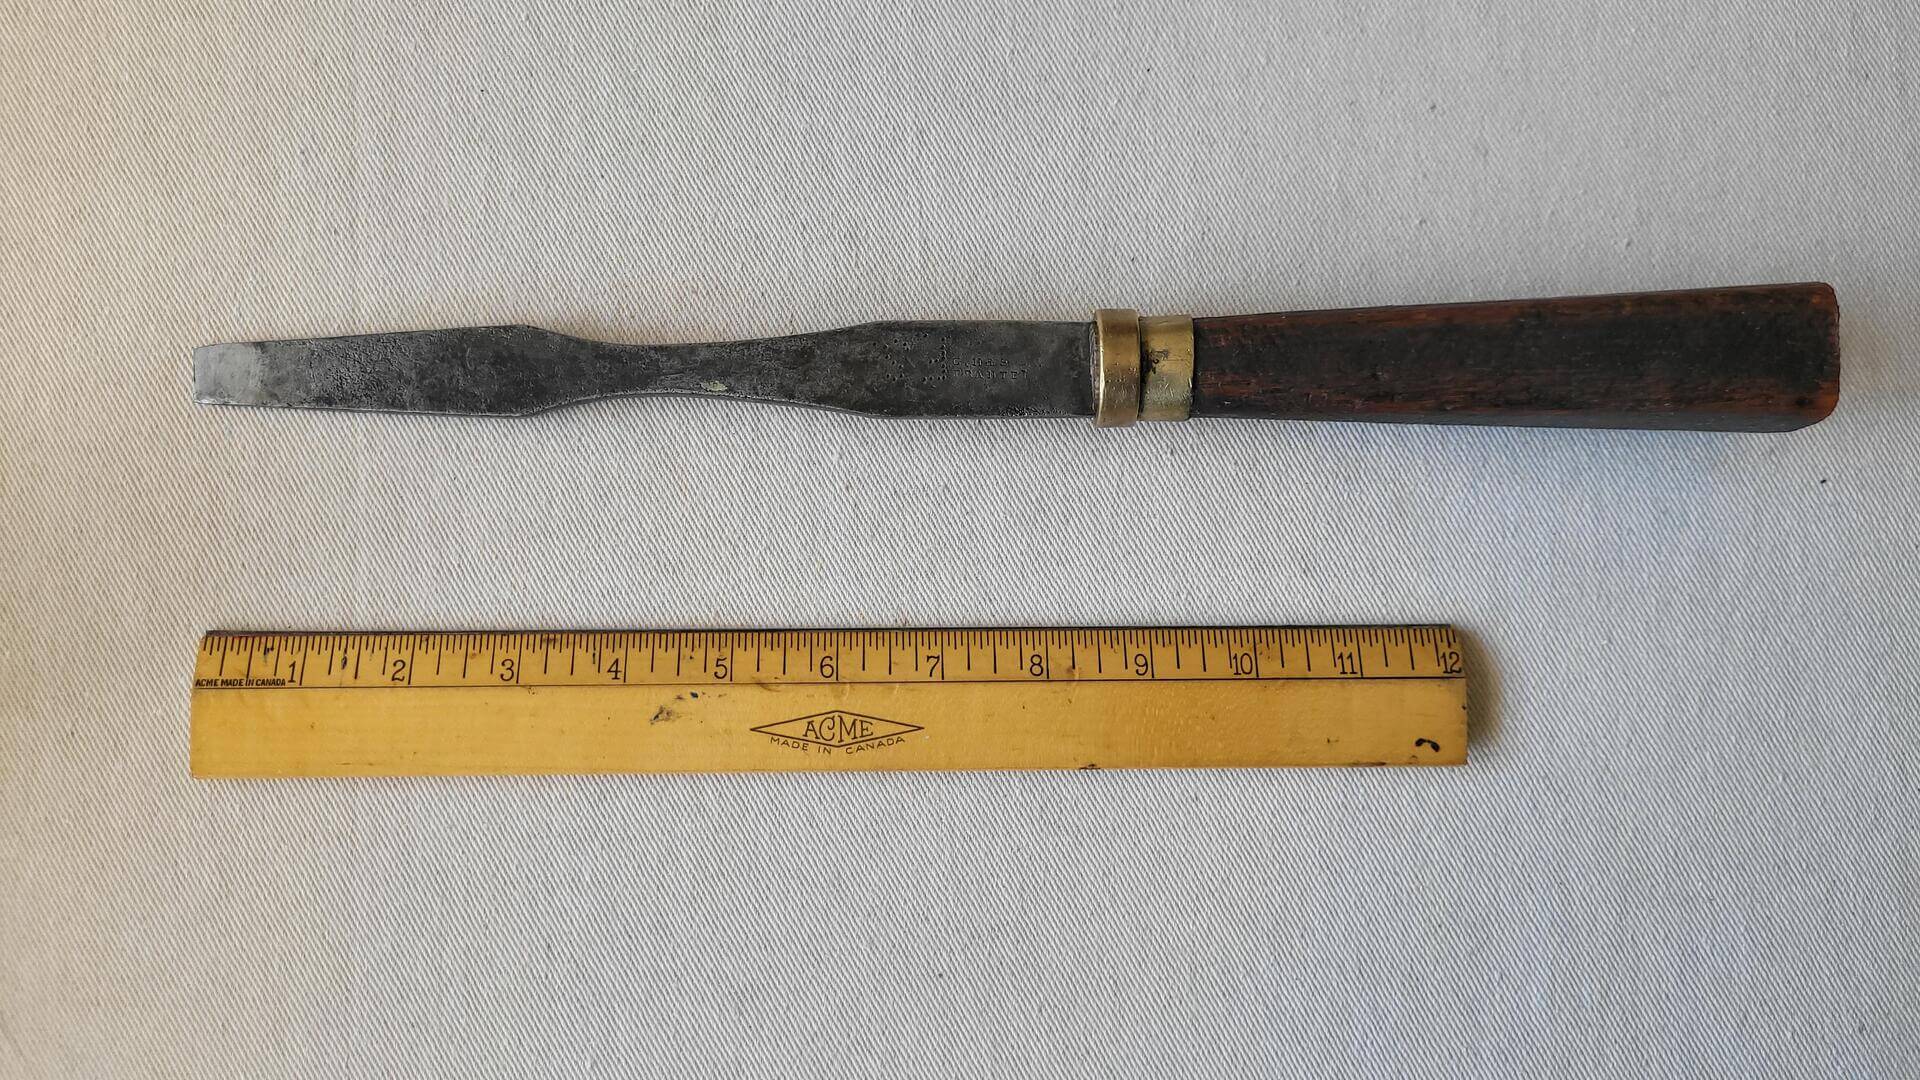 Large vintage flat blade carpenter turnscrew screwdriver engraved G.H. & S. Warranted 16" long. Rare antique collectible woodworking & cabinet maker tools